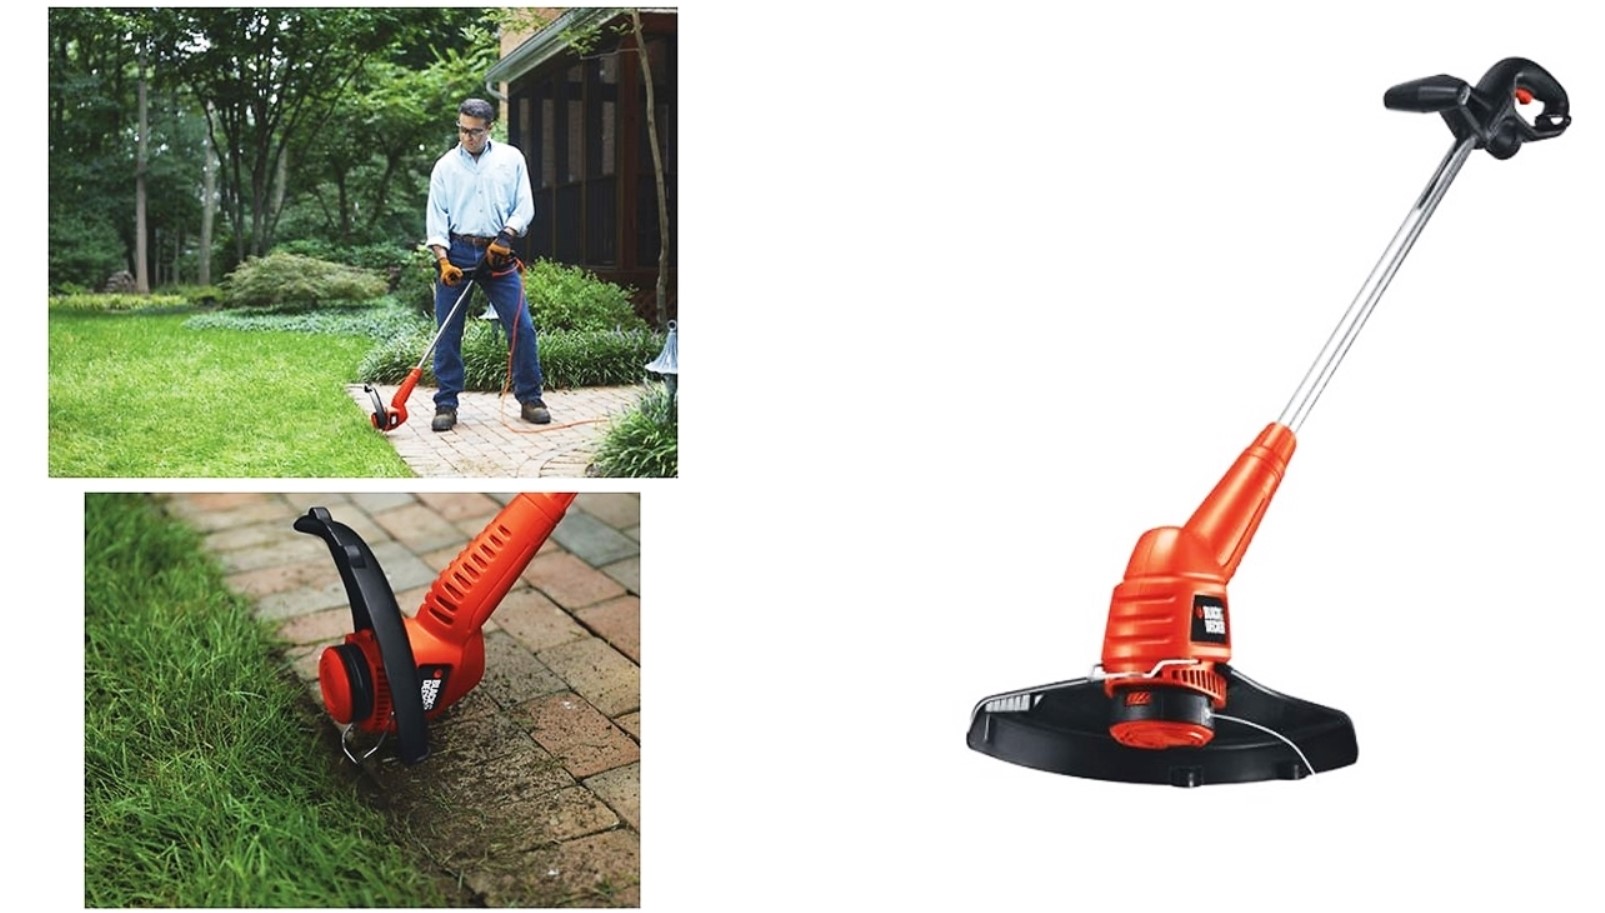  BLACK+DECKER String Trimmer, Electric Automatic Feed, 13-Inch,  4.4-Amp (ST7700) : Weed Wacker : Patio, Lawn & Garden